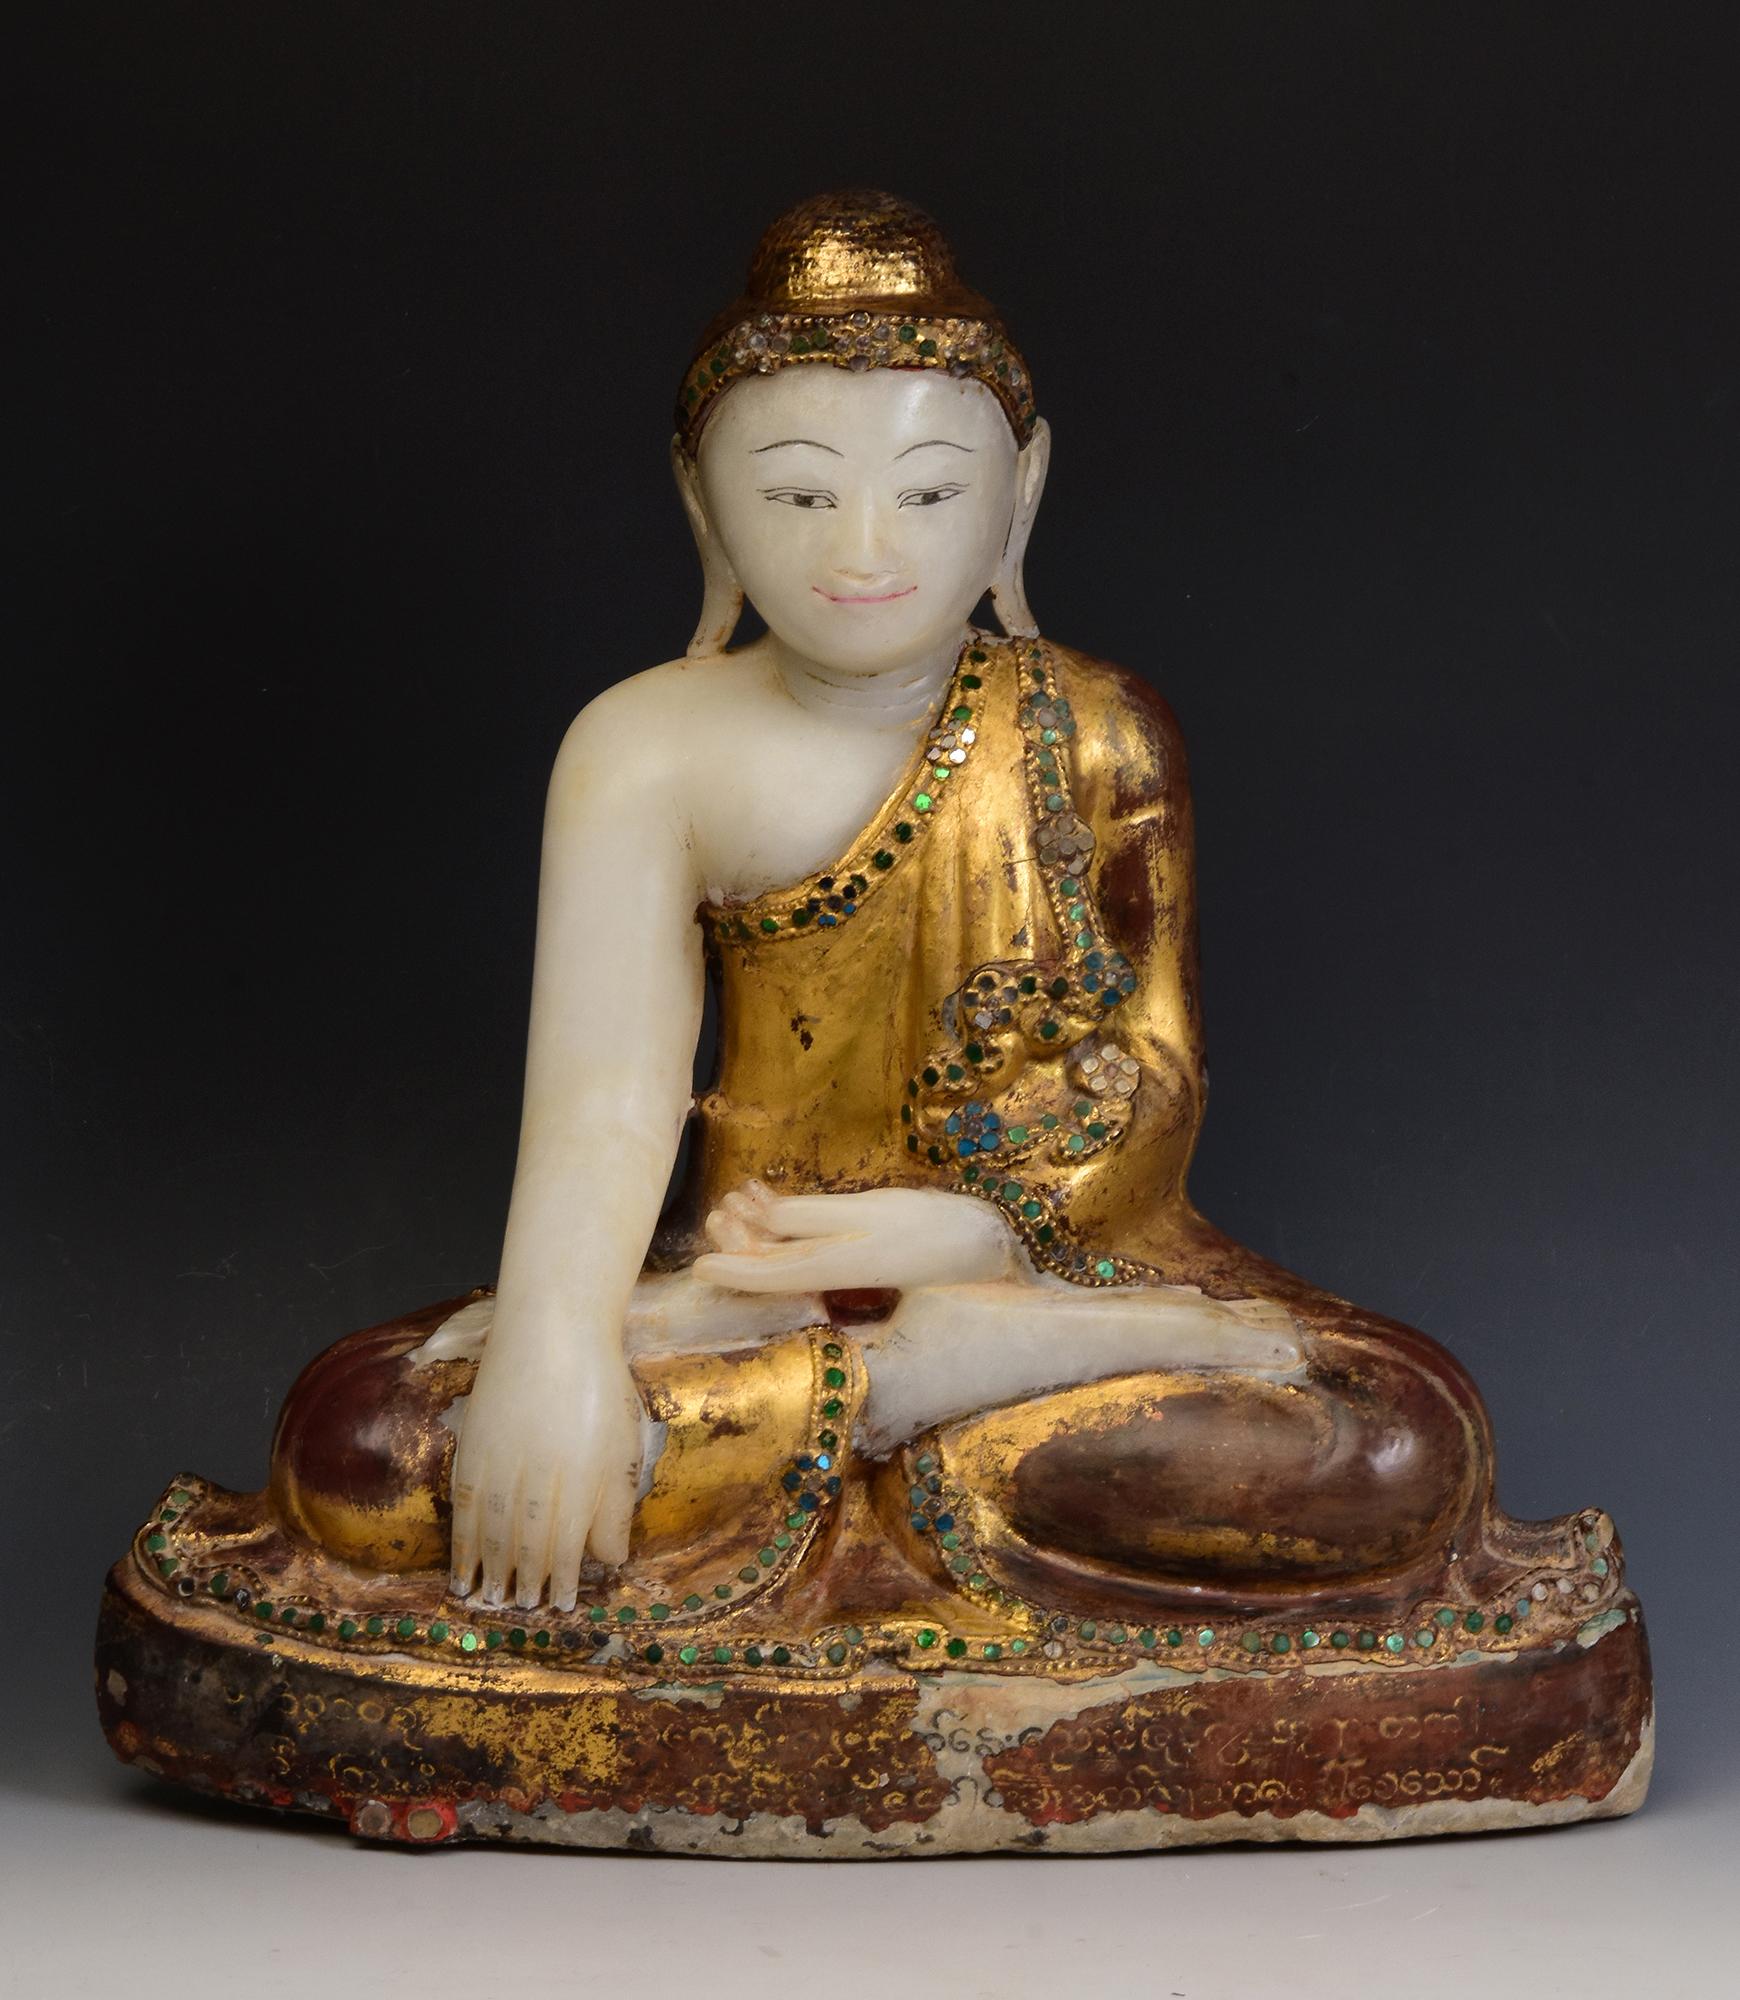 Antique Burmese alabaster Buddha sitting in Mara Vijaya (calling the earth to witness) posture on a base, with original inlay of colorful glass pieces on the headband, borders of the robes and gilding.

Age: Burma, Mandalay Period, 19th